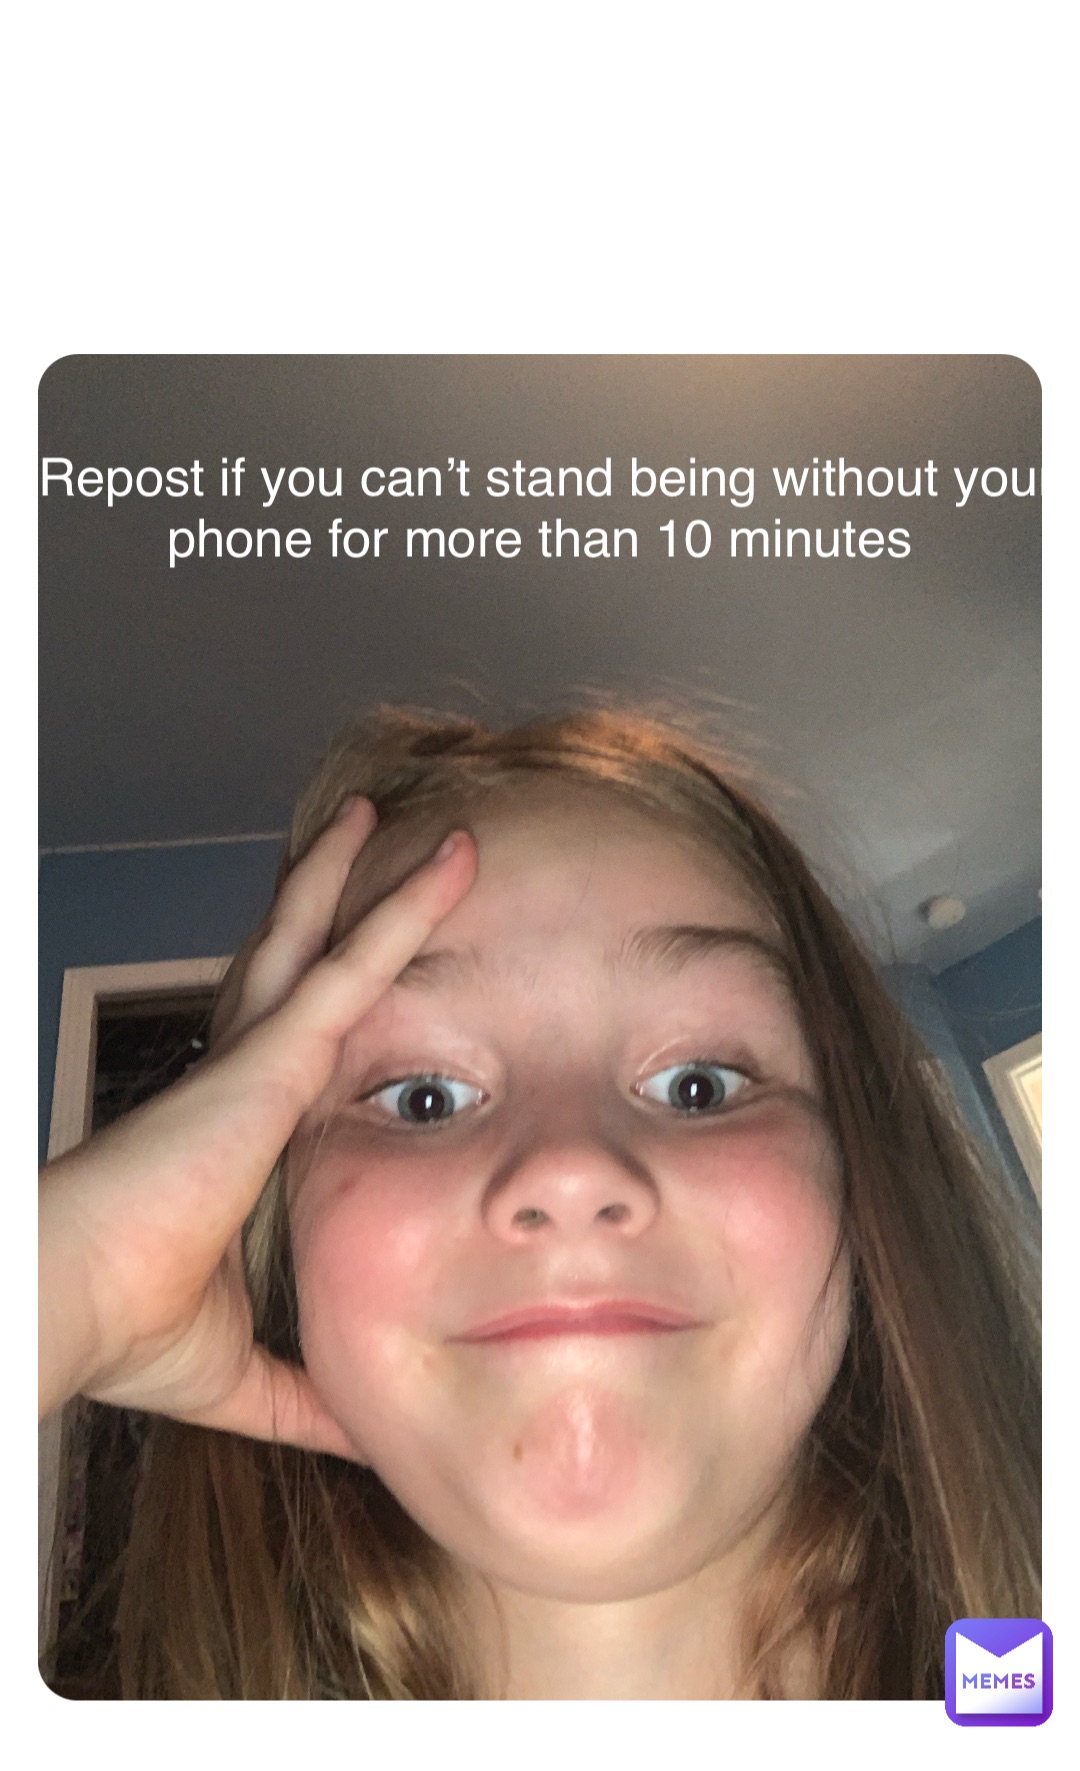 Double tap to edit Repost if you can’t stand being without your phone for more than 10 minutes